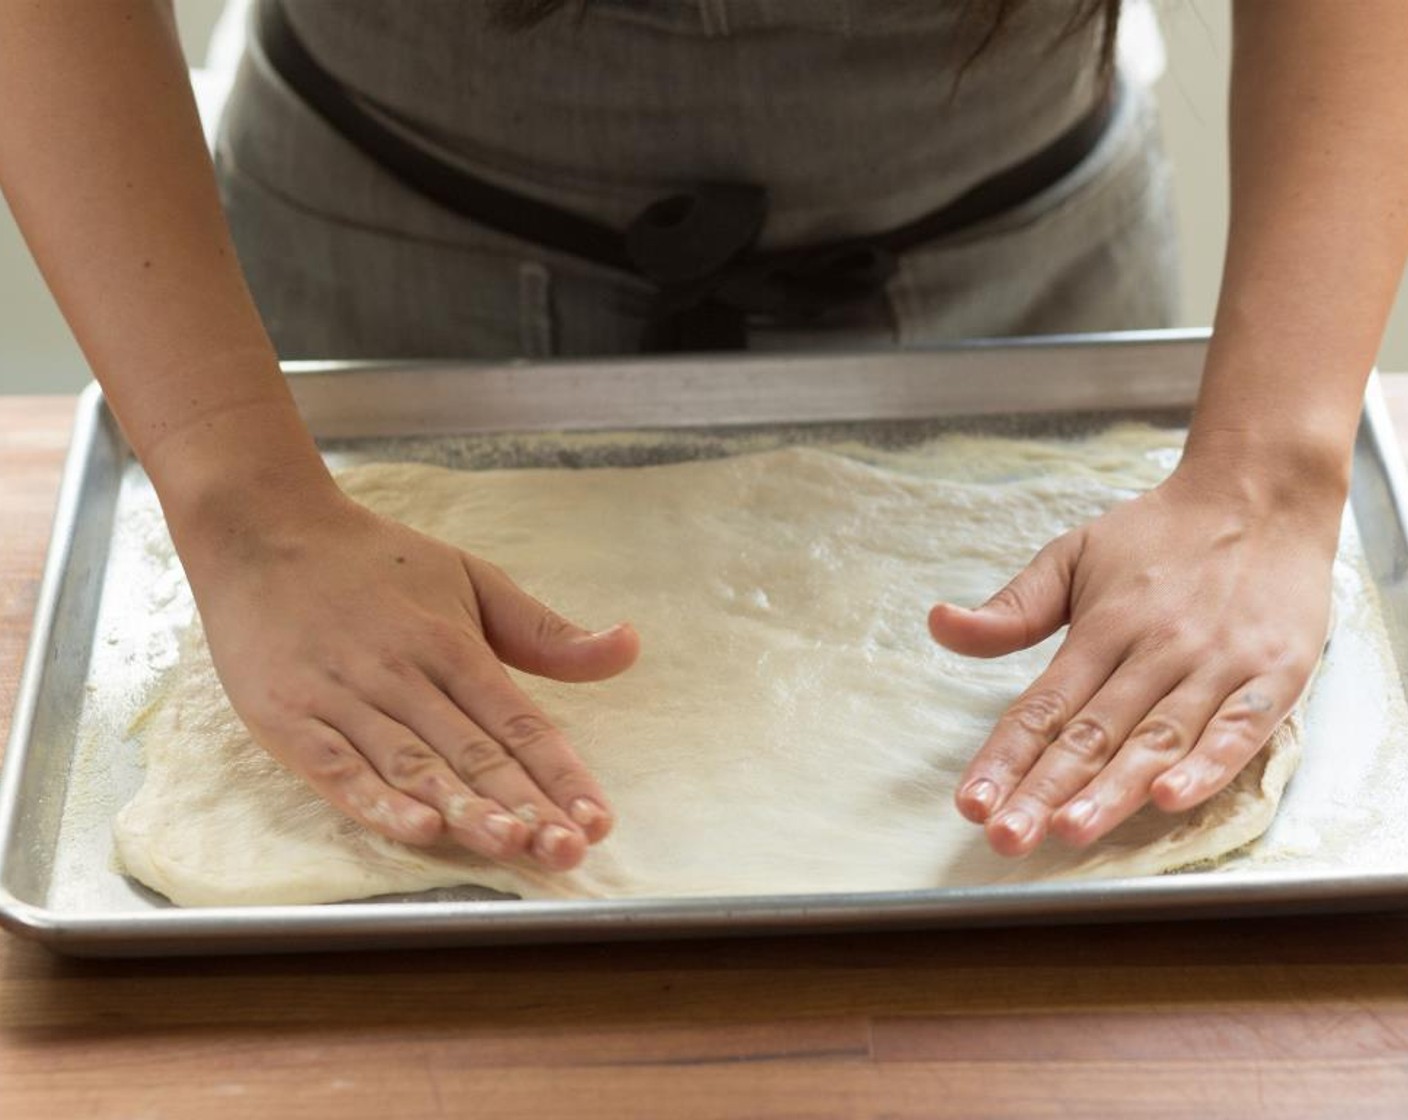 step 4 Sprinkle the Semolina Flour (2 Tbsp) onto a sheet pan to cover. Rub a little Olive Oil (as needed) on your hands to prevent sticking, and gently shape the Pizza Dough (1) into a rectangle. Stretch the dough into a 1/4 inch thickness.